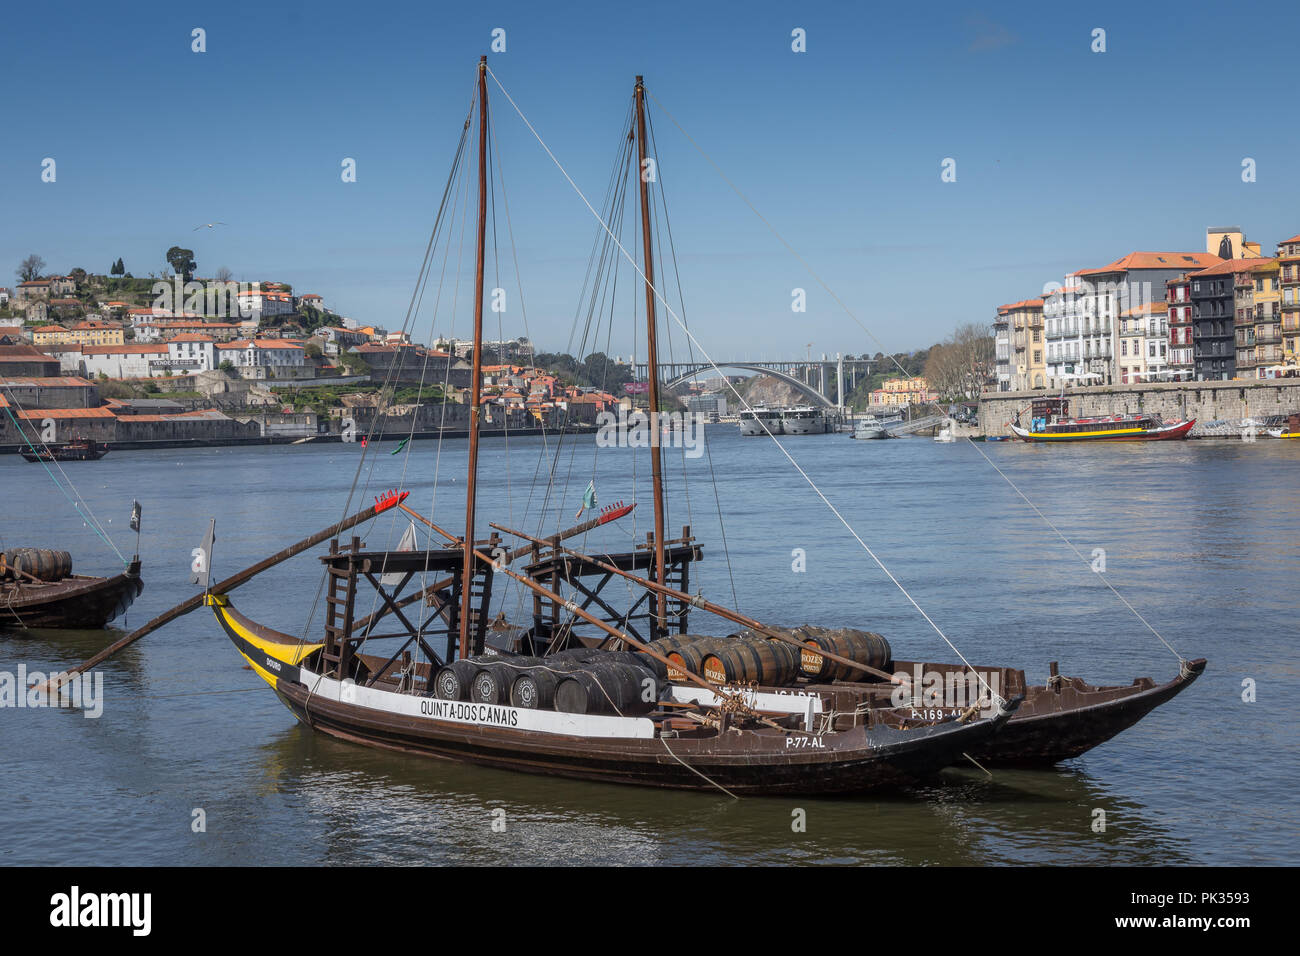 Porto is the second-largest city in Portugal after Lisbon and one of the major urban areas of the Iberian Peninsula. Stock Photo